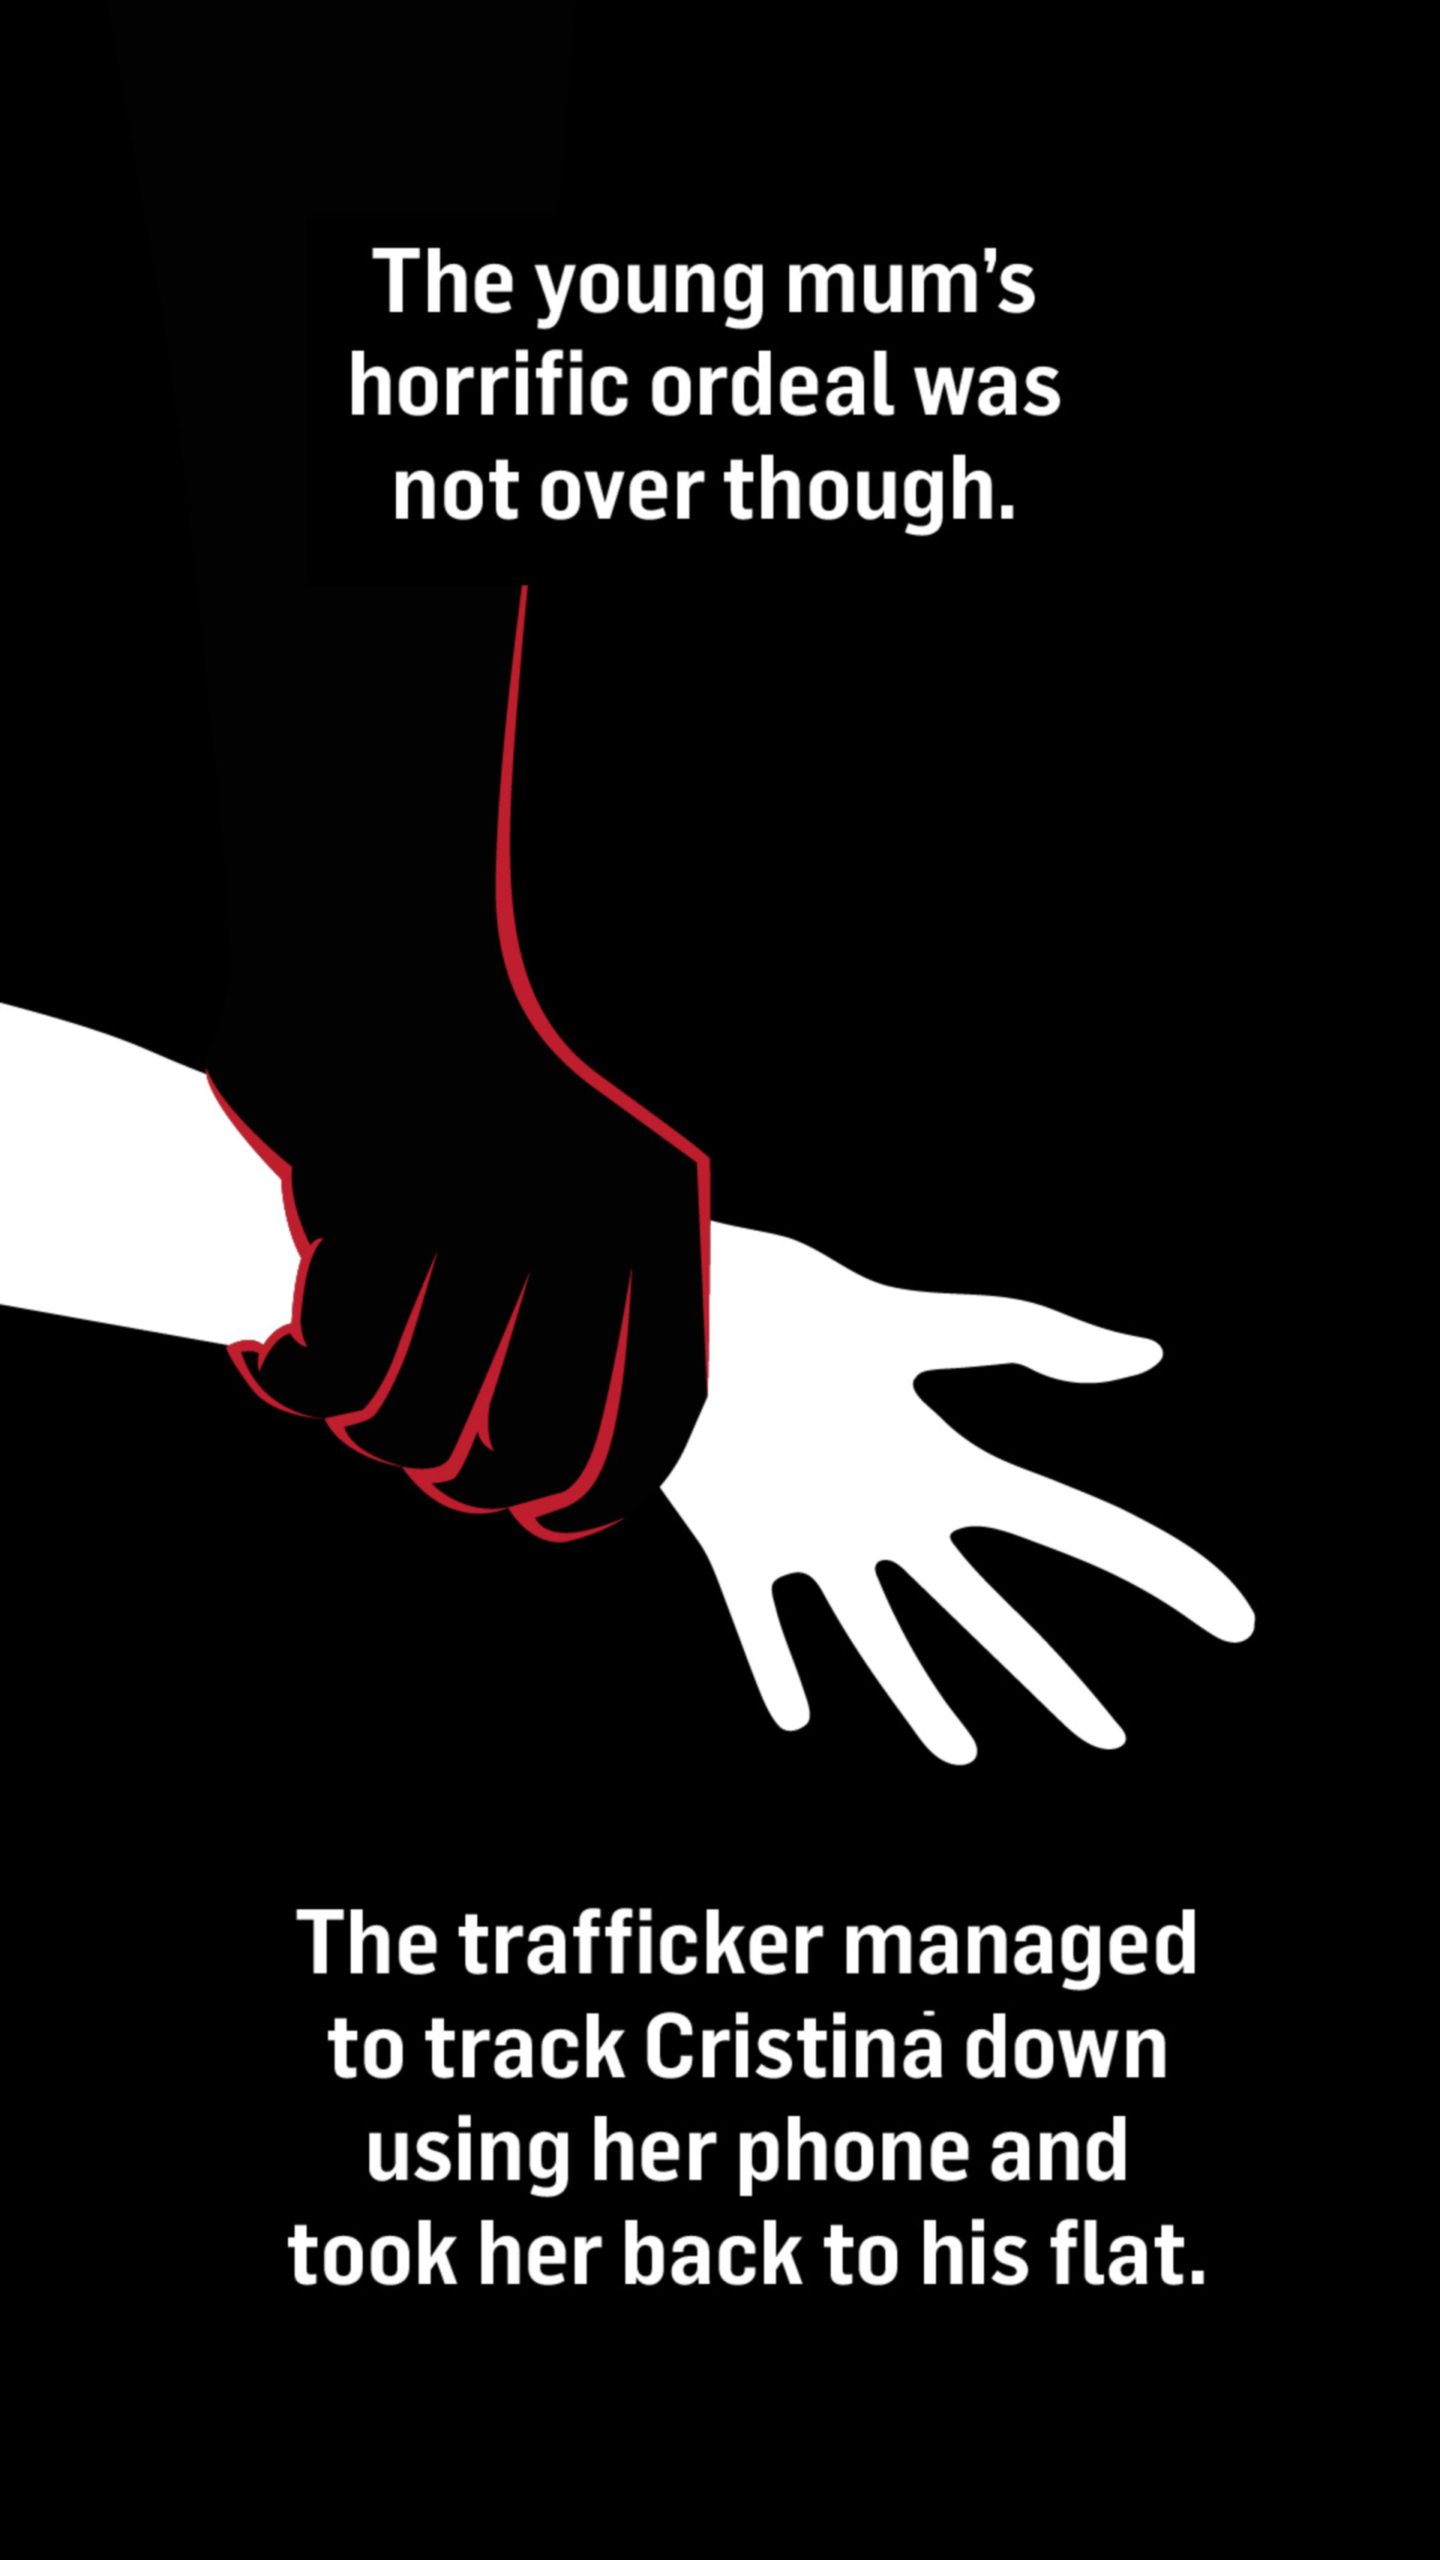 An illustration of a black hand grabbing a white one. Words with the image read: The young mum's horrific ordeal was not over though. The trafficker managed to track Cristina down using her phone and took her back to his flat.